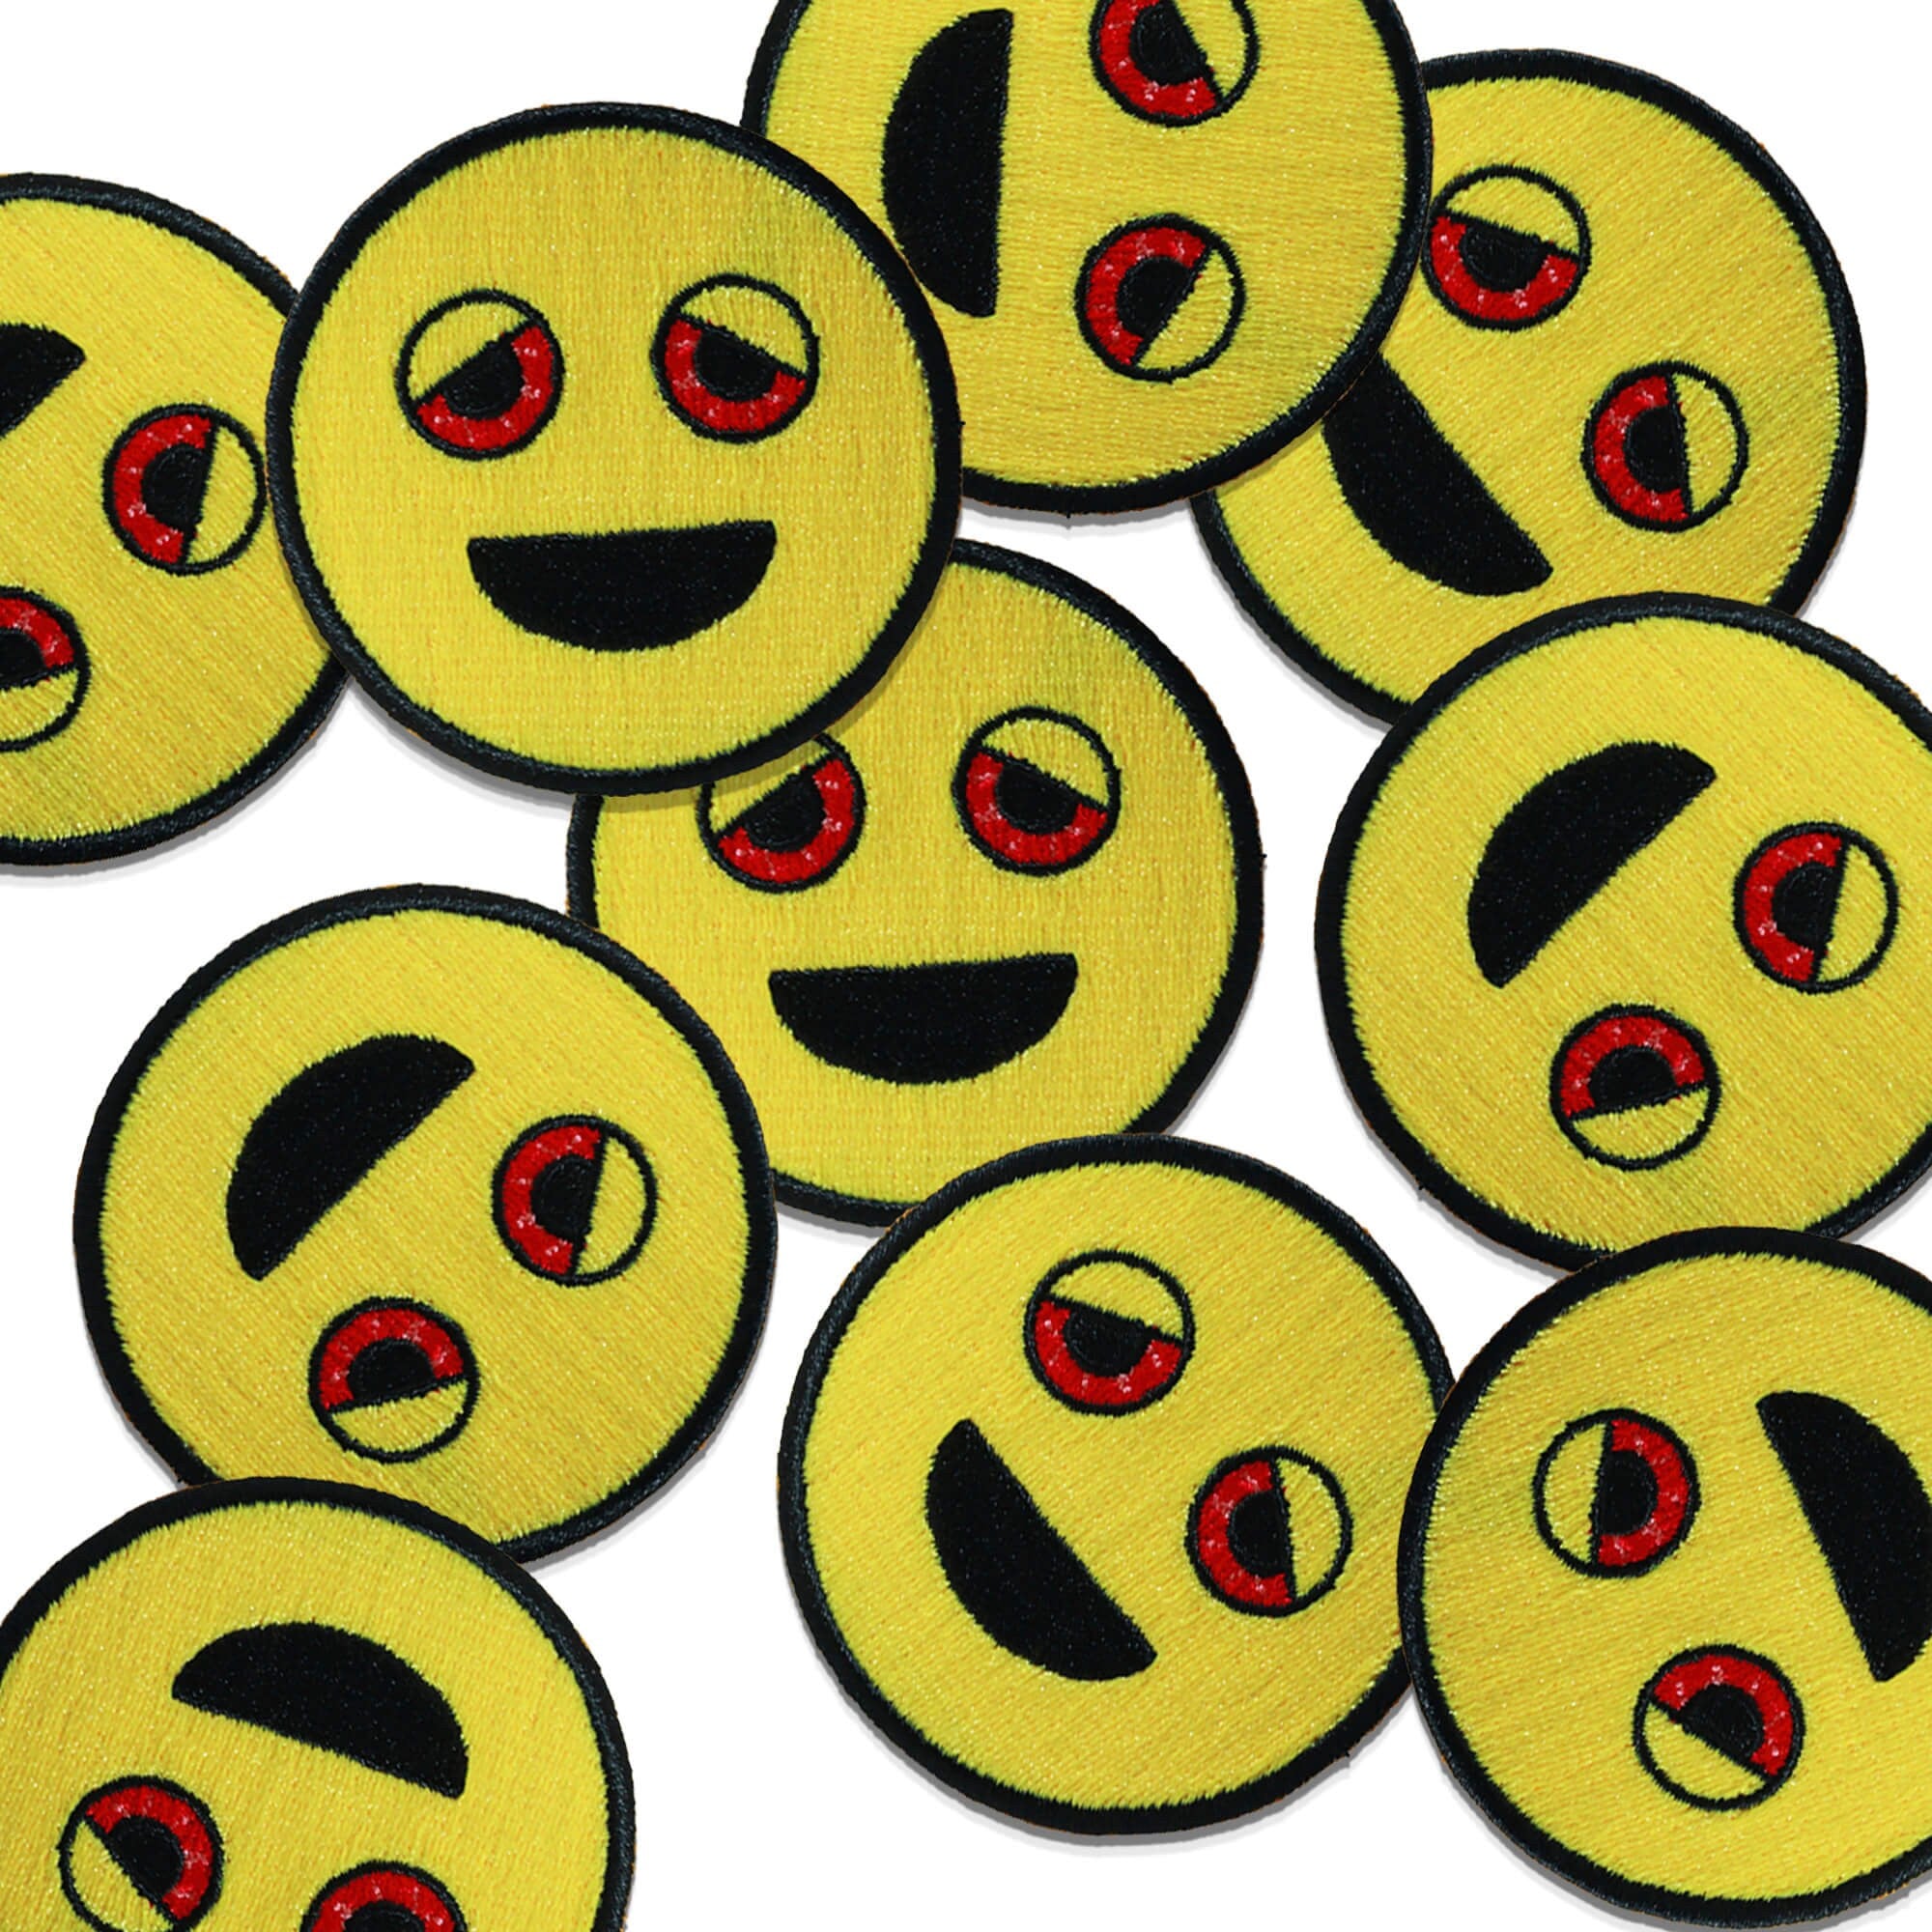 Dazed Emoji Patch for Jackets, Large Stoner Patch, Stoner Weed Gifts, Backpack Patch